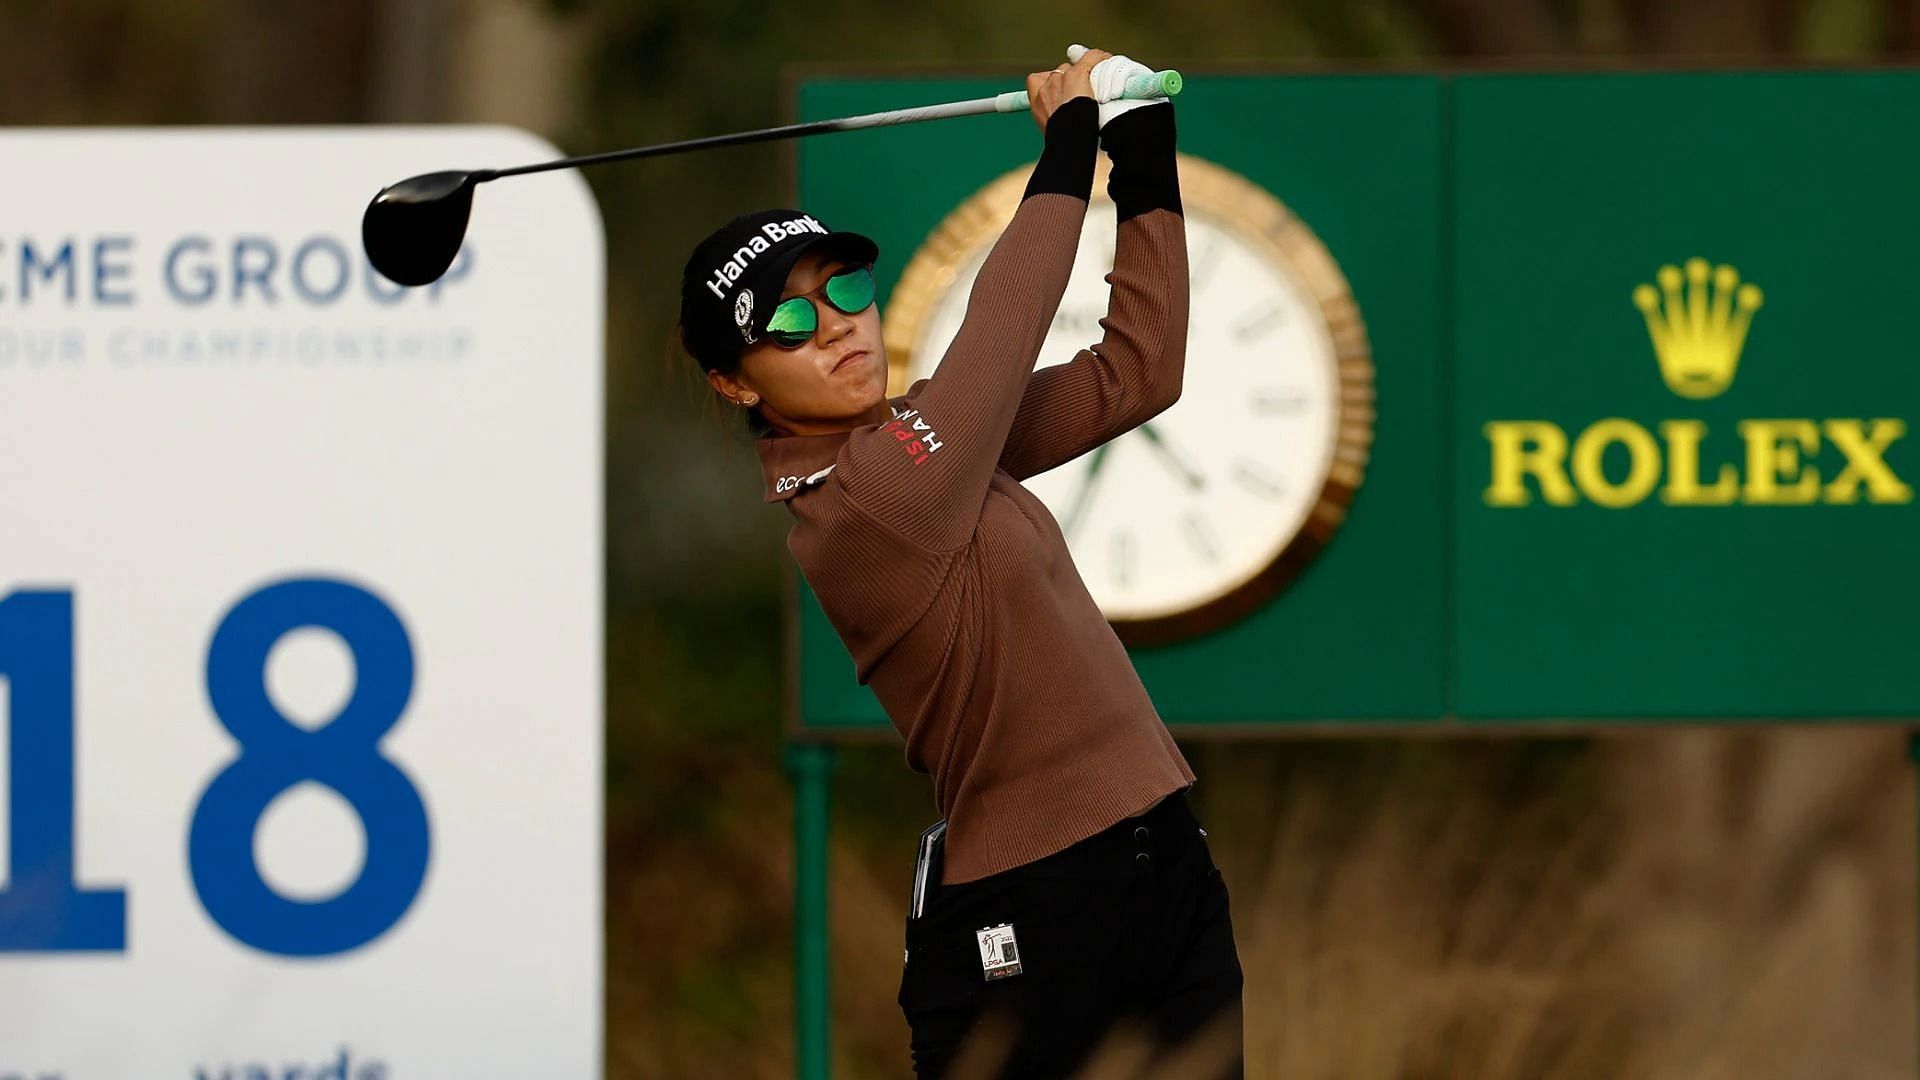 Lydia Ko was the winner at the CME Group Championship 